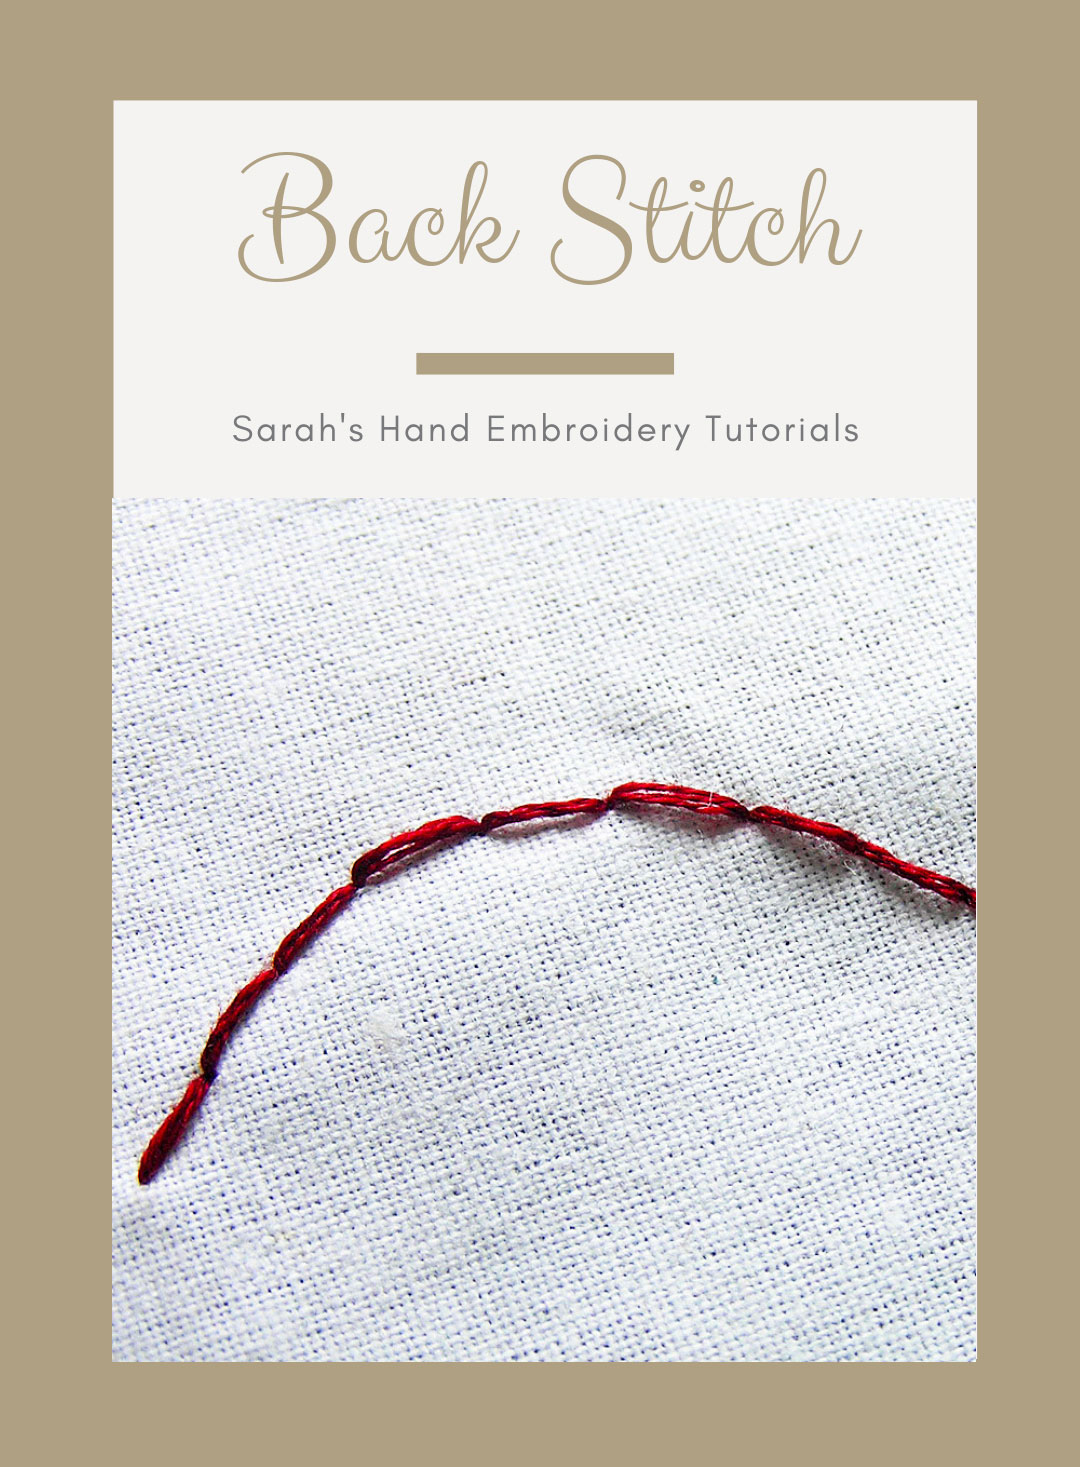 How to do Zigzag Chain Stitch - Sarah's Hand Embroidery Tutorials